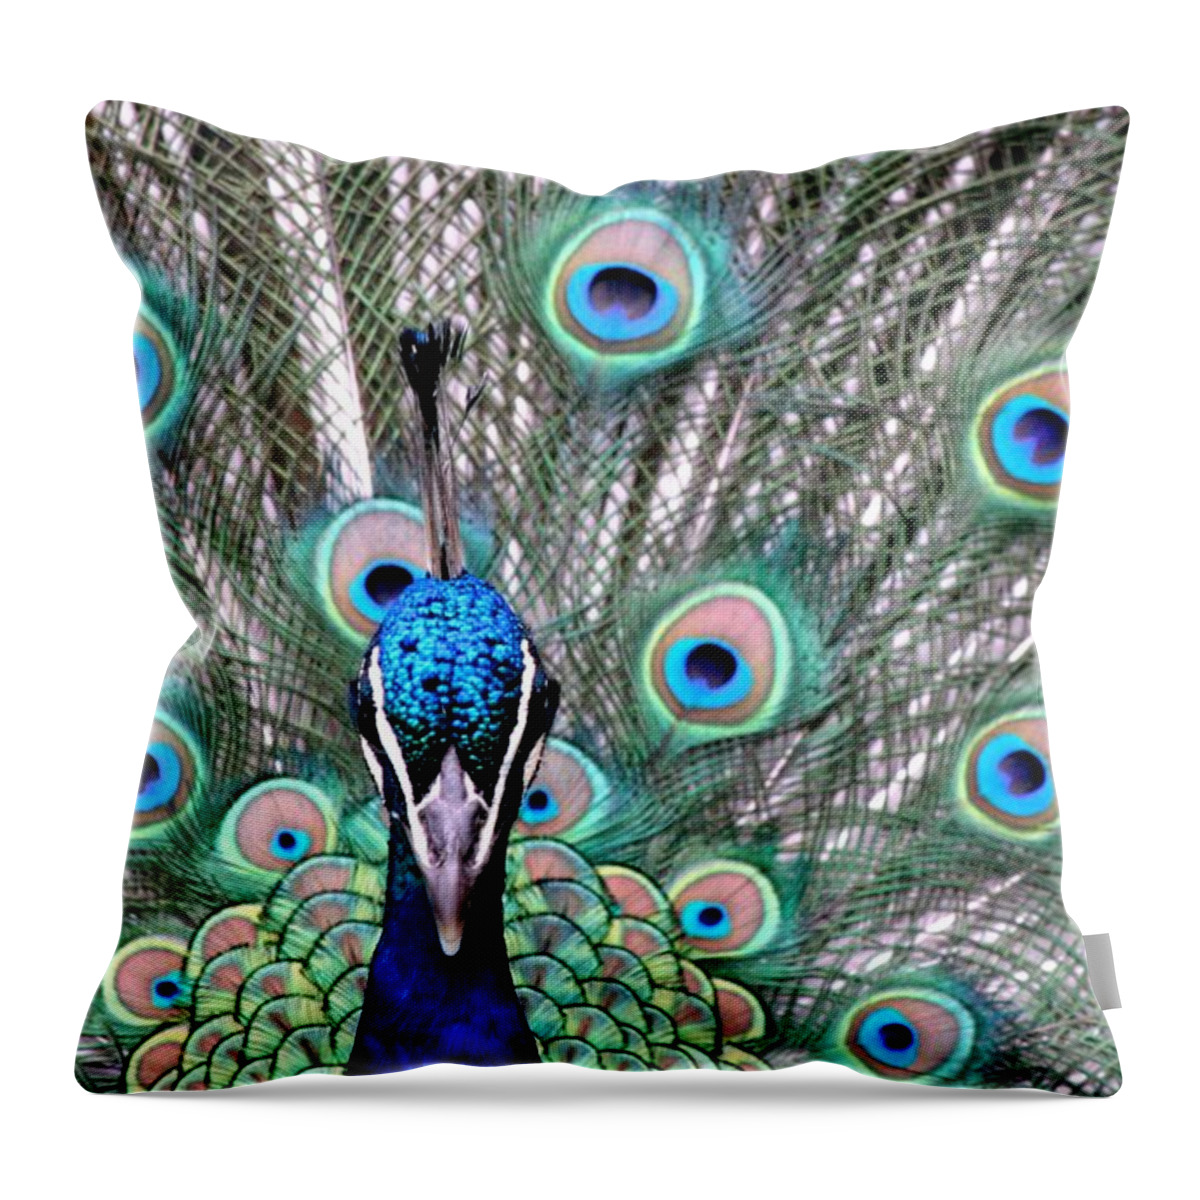 Animal Themes Throw Pillow featuring the photograph Peacock by E J Davies